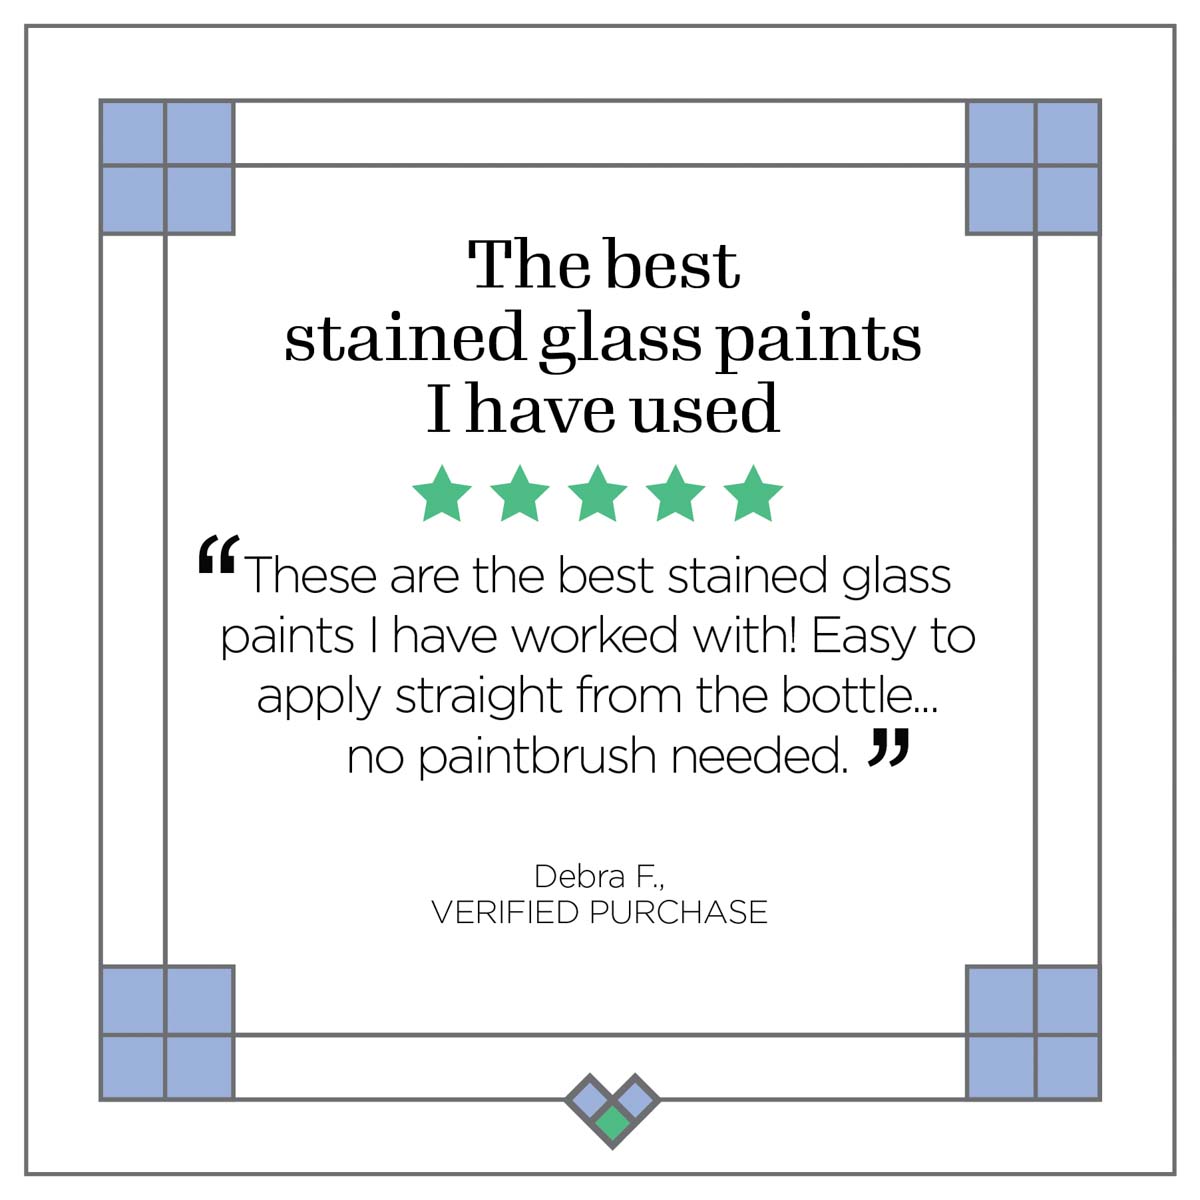 Gallery Glass ® Stained Glass Effect Paint - Denim, 2 oz. - 20033